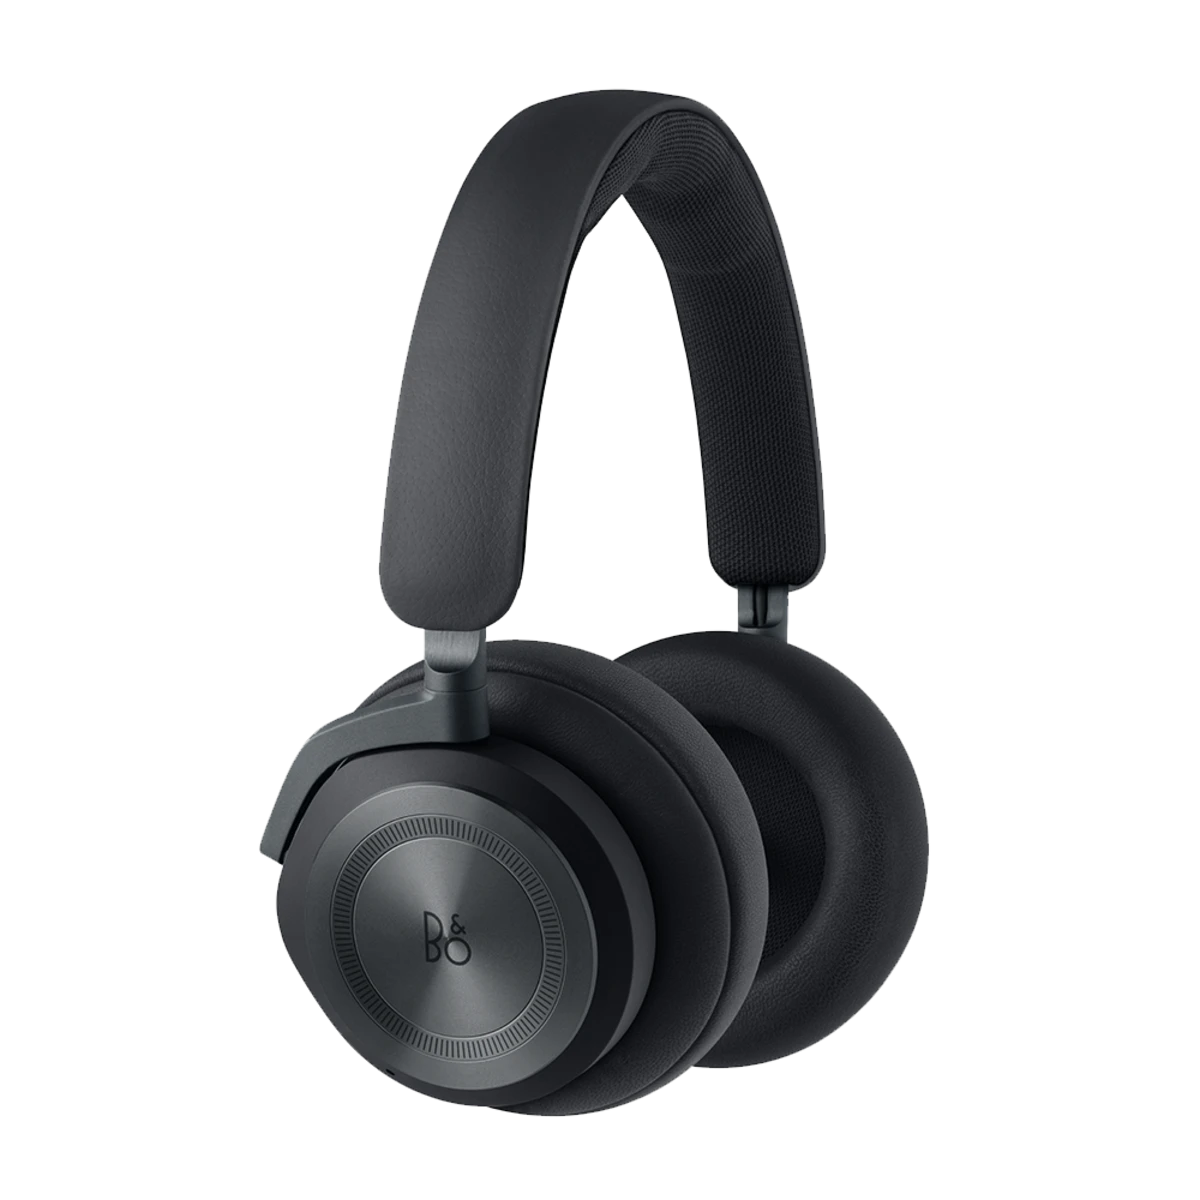 Bang & Olufsen Beoplay HX - Comfortable, do-it-all headphones